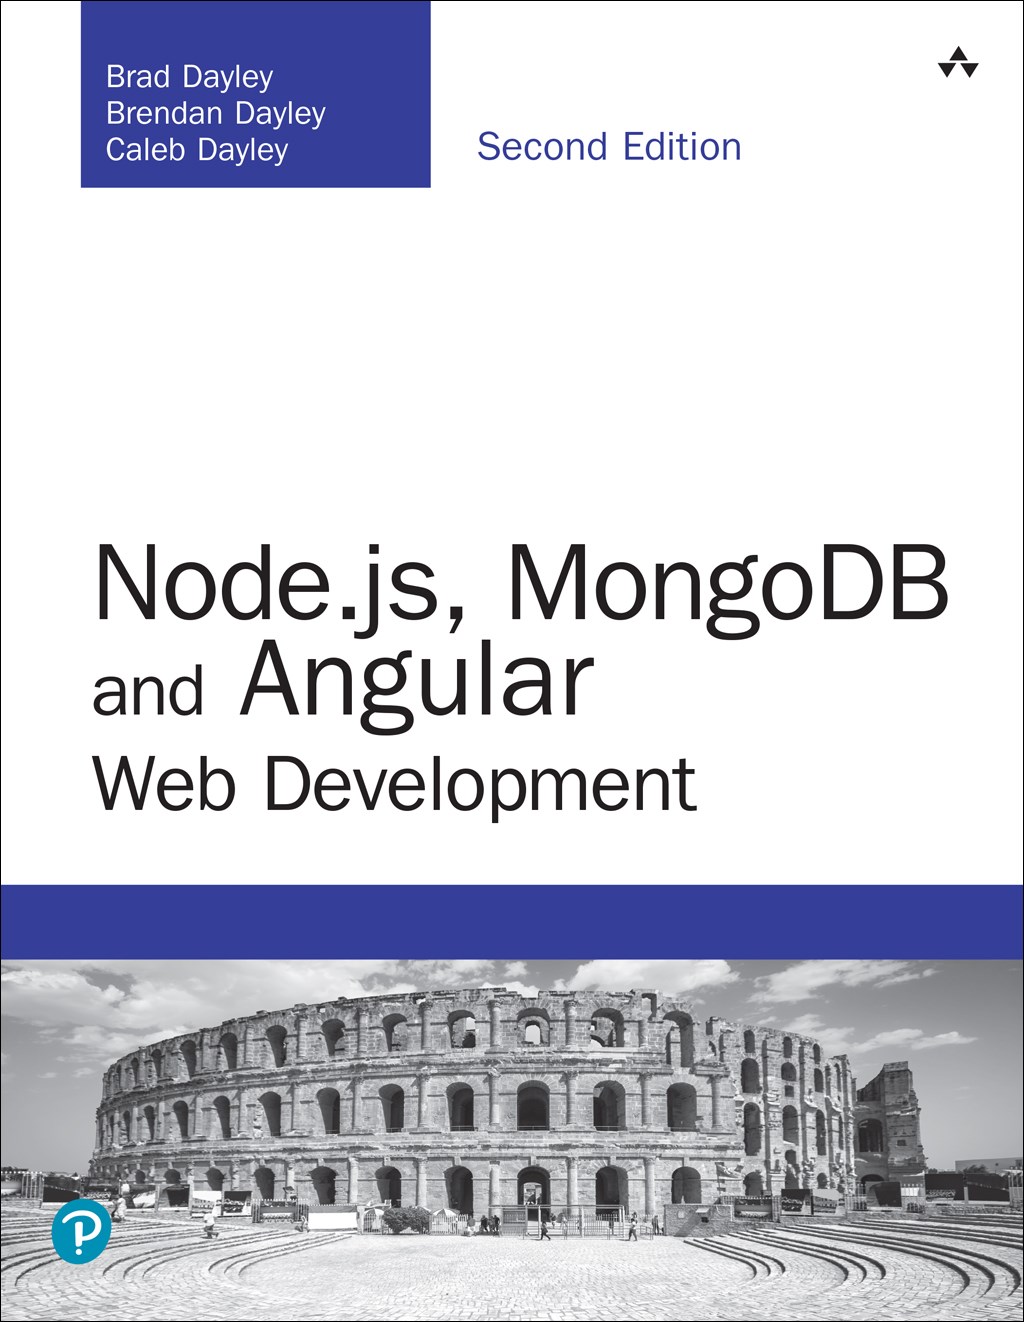 Node.js, MongoDB and Angular Web Development: The definitive guide to using the MEAN stack to build web applications (Web Edition), 2nd Edition